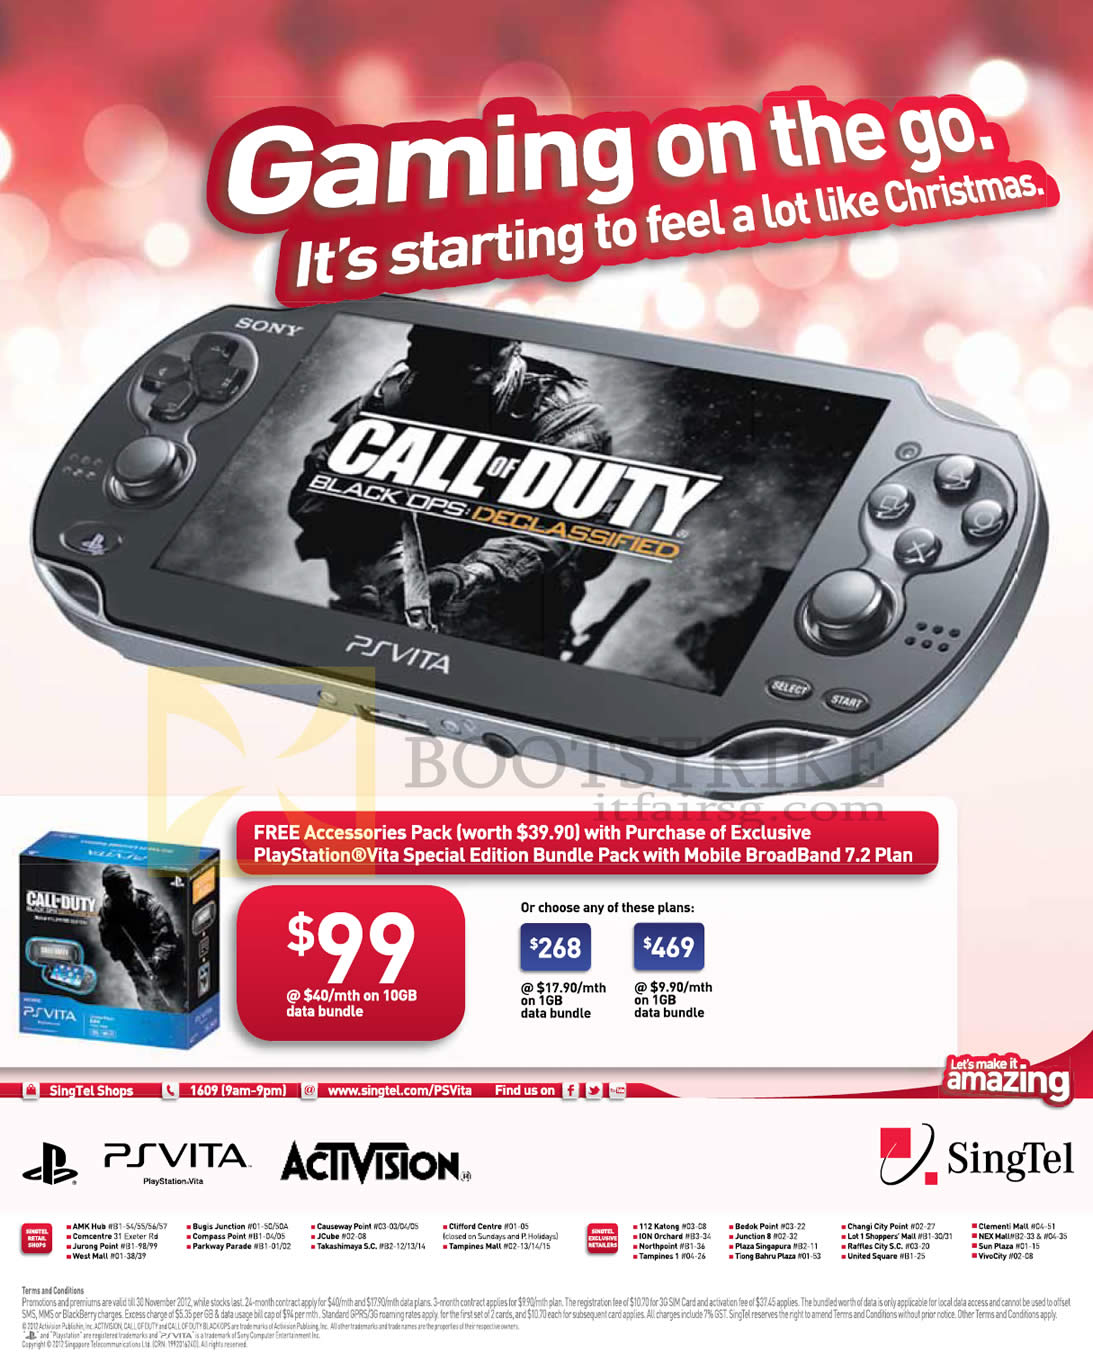 SITEX 2012 price list image brochure of Singtel Mobile Broadband PlayStation Vita Special Edition Free Accessories Pack